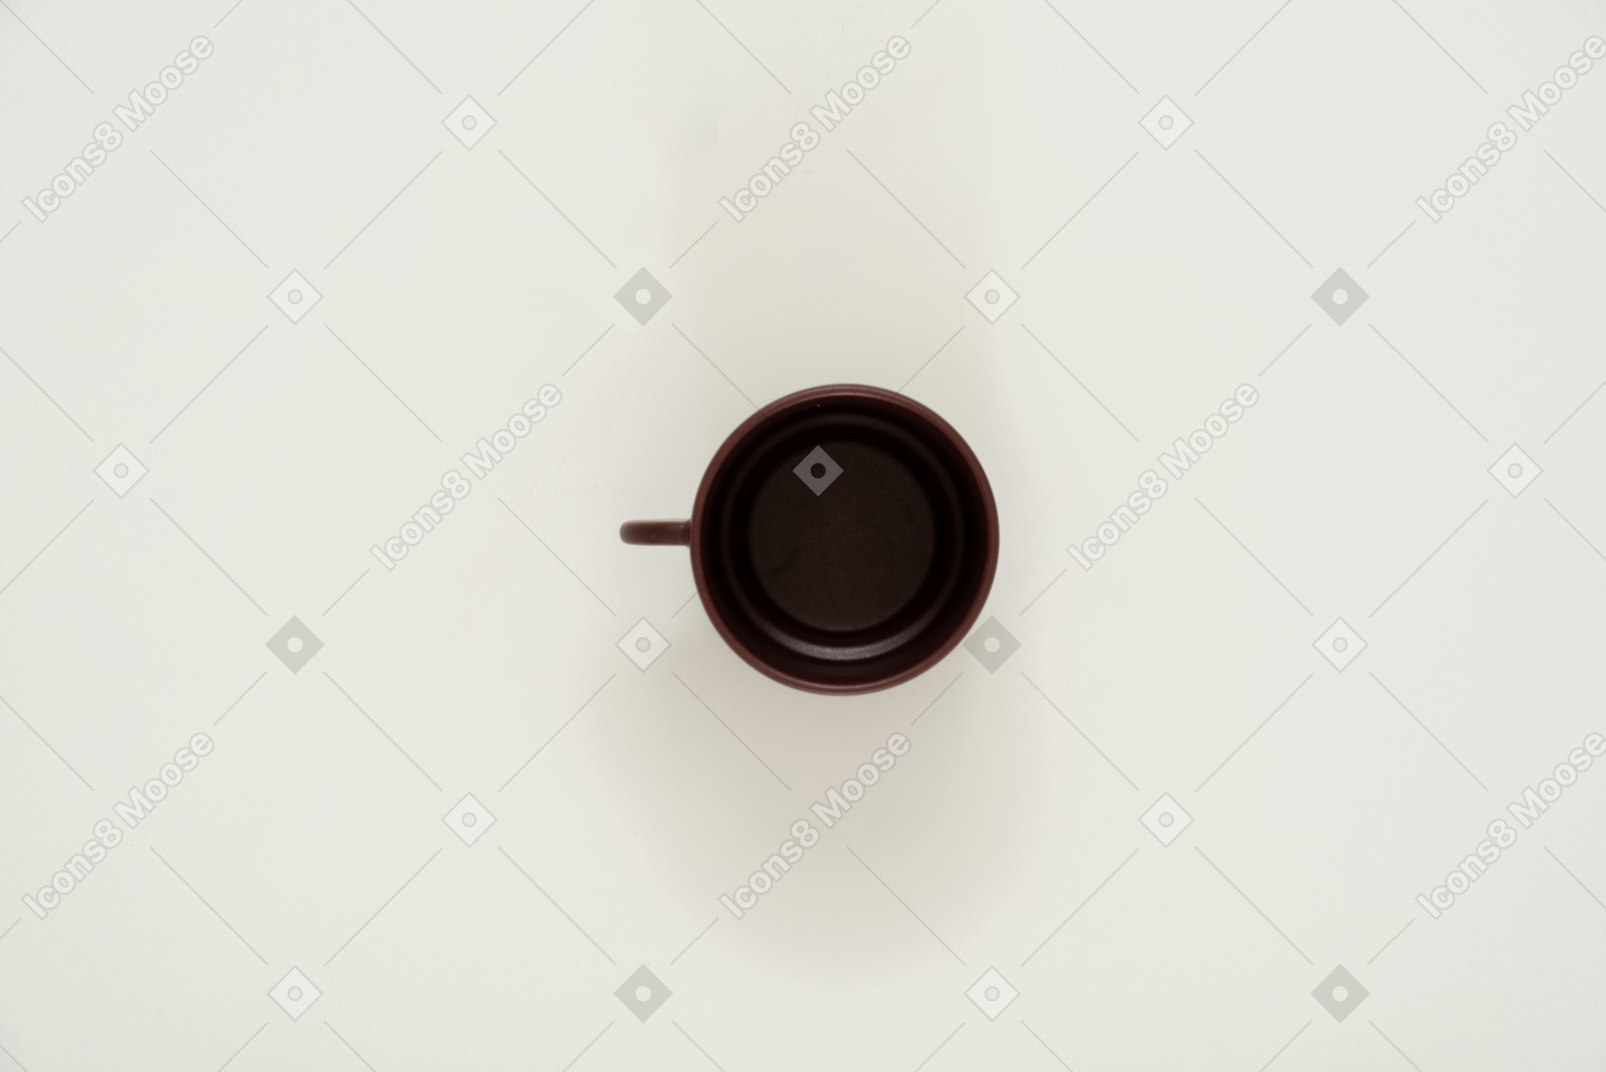 Ceramic cup, a view from above